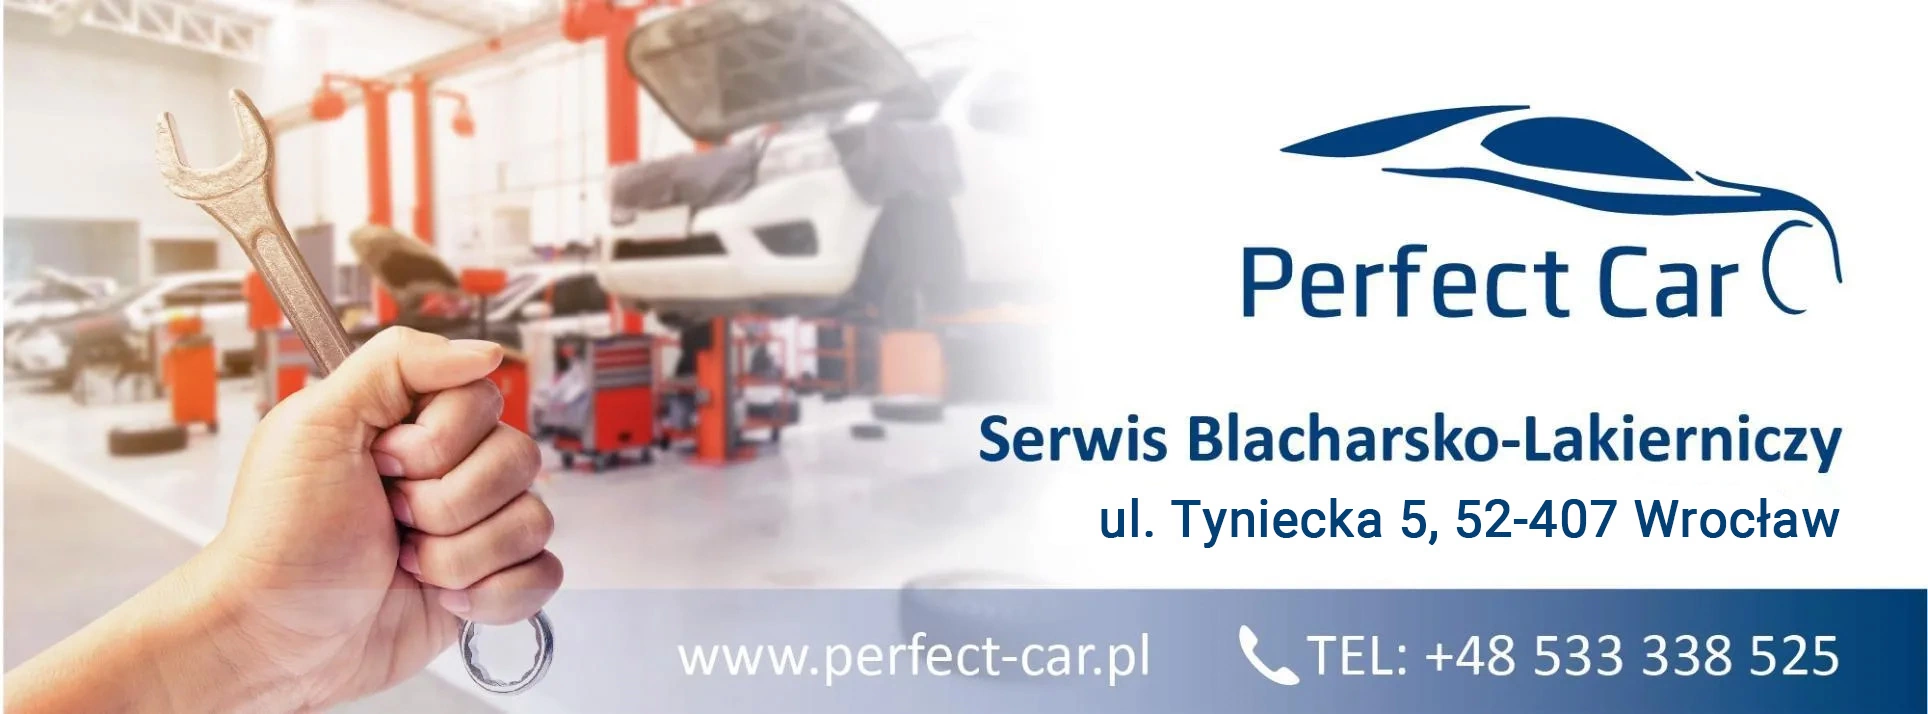 banner reklamowy Perfect Care blacharstwo